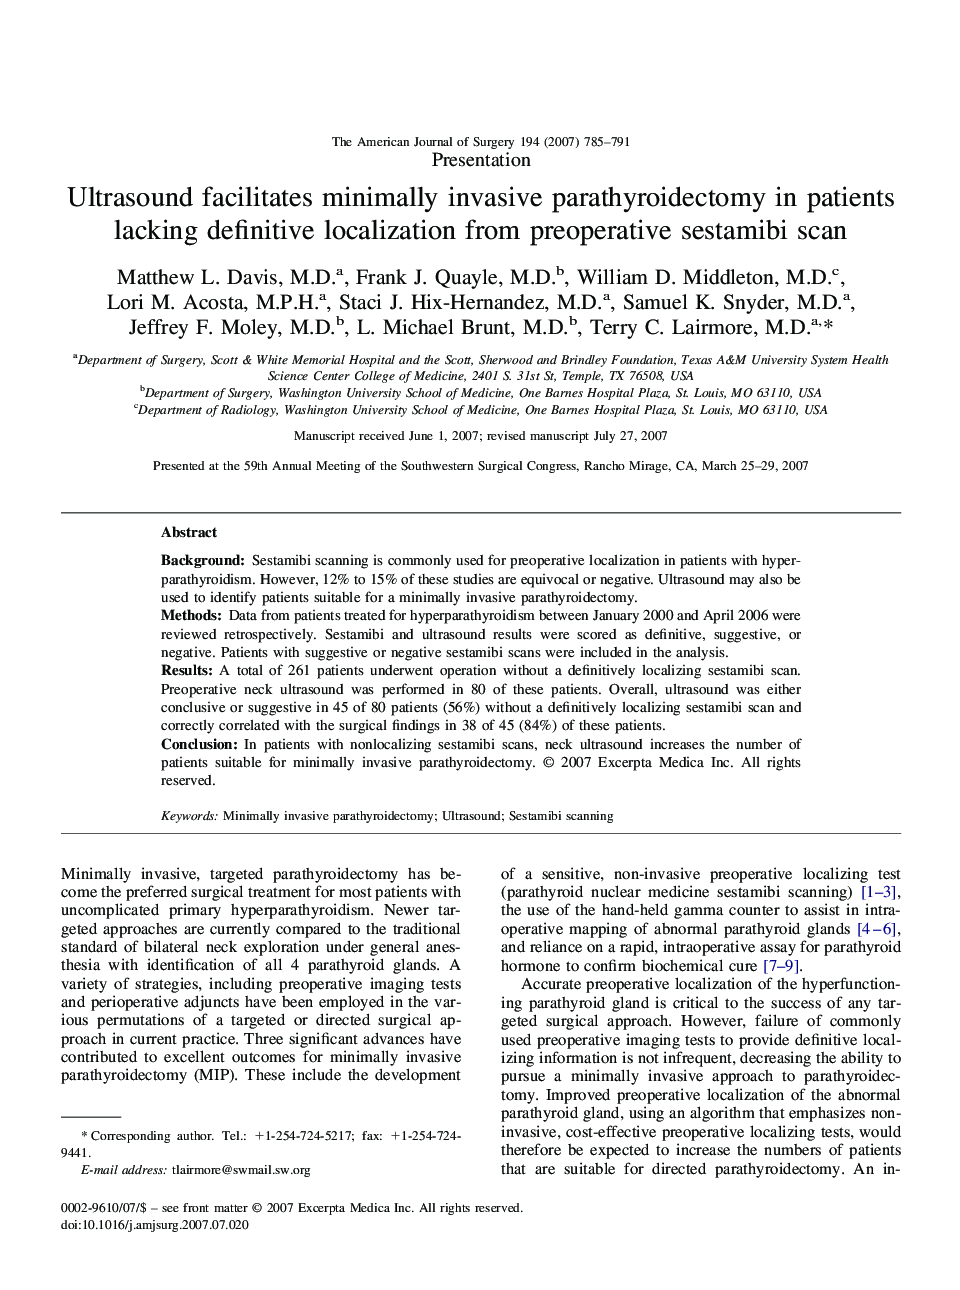 Ultrasound facilitates minimally invasive parathyroidectomy in patients lacking definitive localization from preoperative sestamibi scan